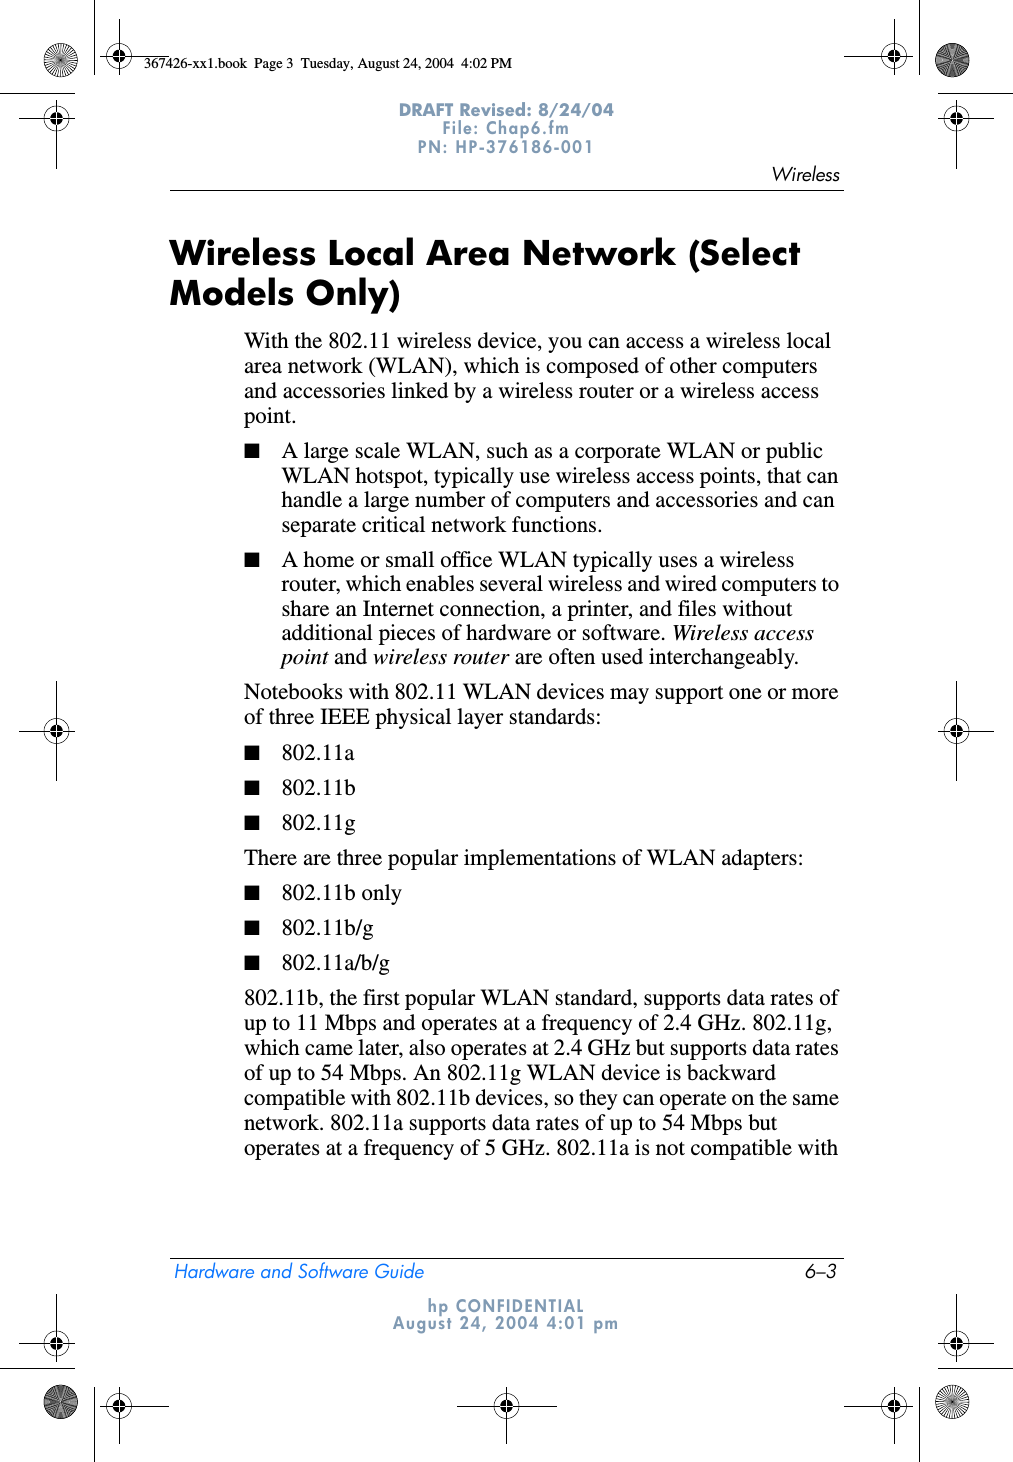 WirelessHardware and Software Guide 6–3DRAFT Revised: 8/24/04File: Chap6.fm PN: HP-376186-001 hp CONFIDENTIALAugust 24, 2004 4:01 pmWireless Local Area Network (Select Models Only)With the 802.11 wireless device, you can access a wireless local area network (WLAN), which is composed of other computers and accessories linked by a wireless router or a wireless access point. ■A large scale WLAN, such as a corporate WLAN or public WLAN hotspot, typically use wireless access points, that can handle a large number of computers and accessories and can separate critical network functions. ■A home or small office WLAN typically uses a wireless router, which enables several wireless and wired computers to share an Internet connection, a printer, and files without additional pieces of hardware or software. Wireless access point and wireless router are often used interchangeably. Notebooks with 802.11 WLAN devices may support one or more of three IEEE physical layer standards: ■802.11a■802.11b■802.11gThere are three popular implementations of WLAN adapters:■802.11b only■802.11b/g■802.11a/b/g802.11b, the first popular WLAN standard, supports data rates of up to 11 Mbps and operates at a frequency of 2.4 GHz. 802.11g, which came later, also operates at 2.4 GHz but supports data rates of up to 54 Mbps. An 802.11g WLAN device is backward compatible with 802.11b devices, so they can operate on the same network. 802.11a supports data rates of up to 54 Mbps but operates at a frequency of 5 GHz. 802.11a is not compatible with 367426-xx1.book  Page 3  Tuesday, August 24, 2004  4:02 PM